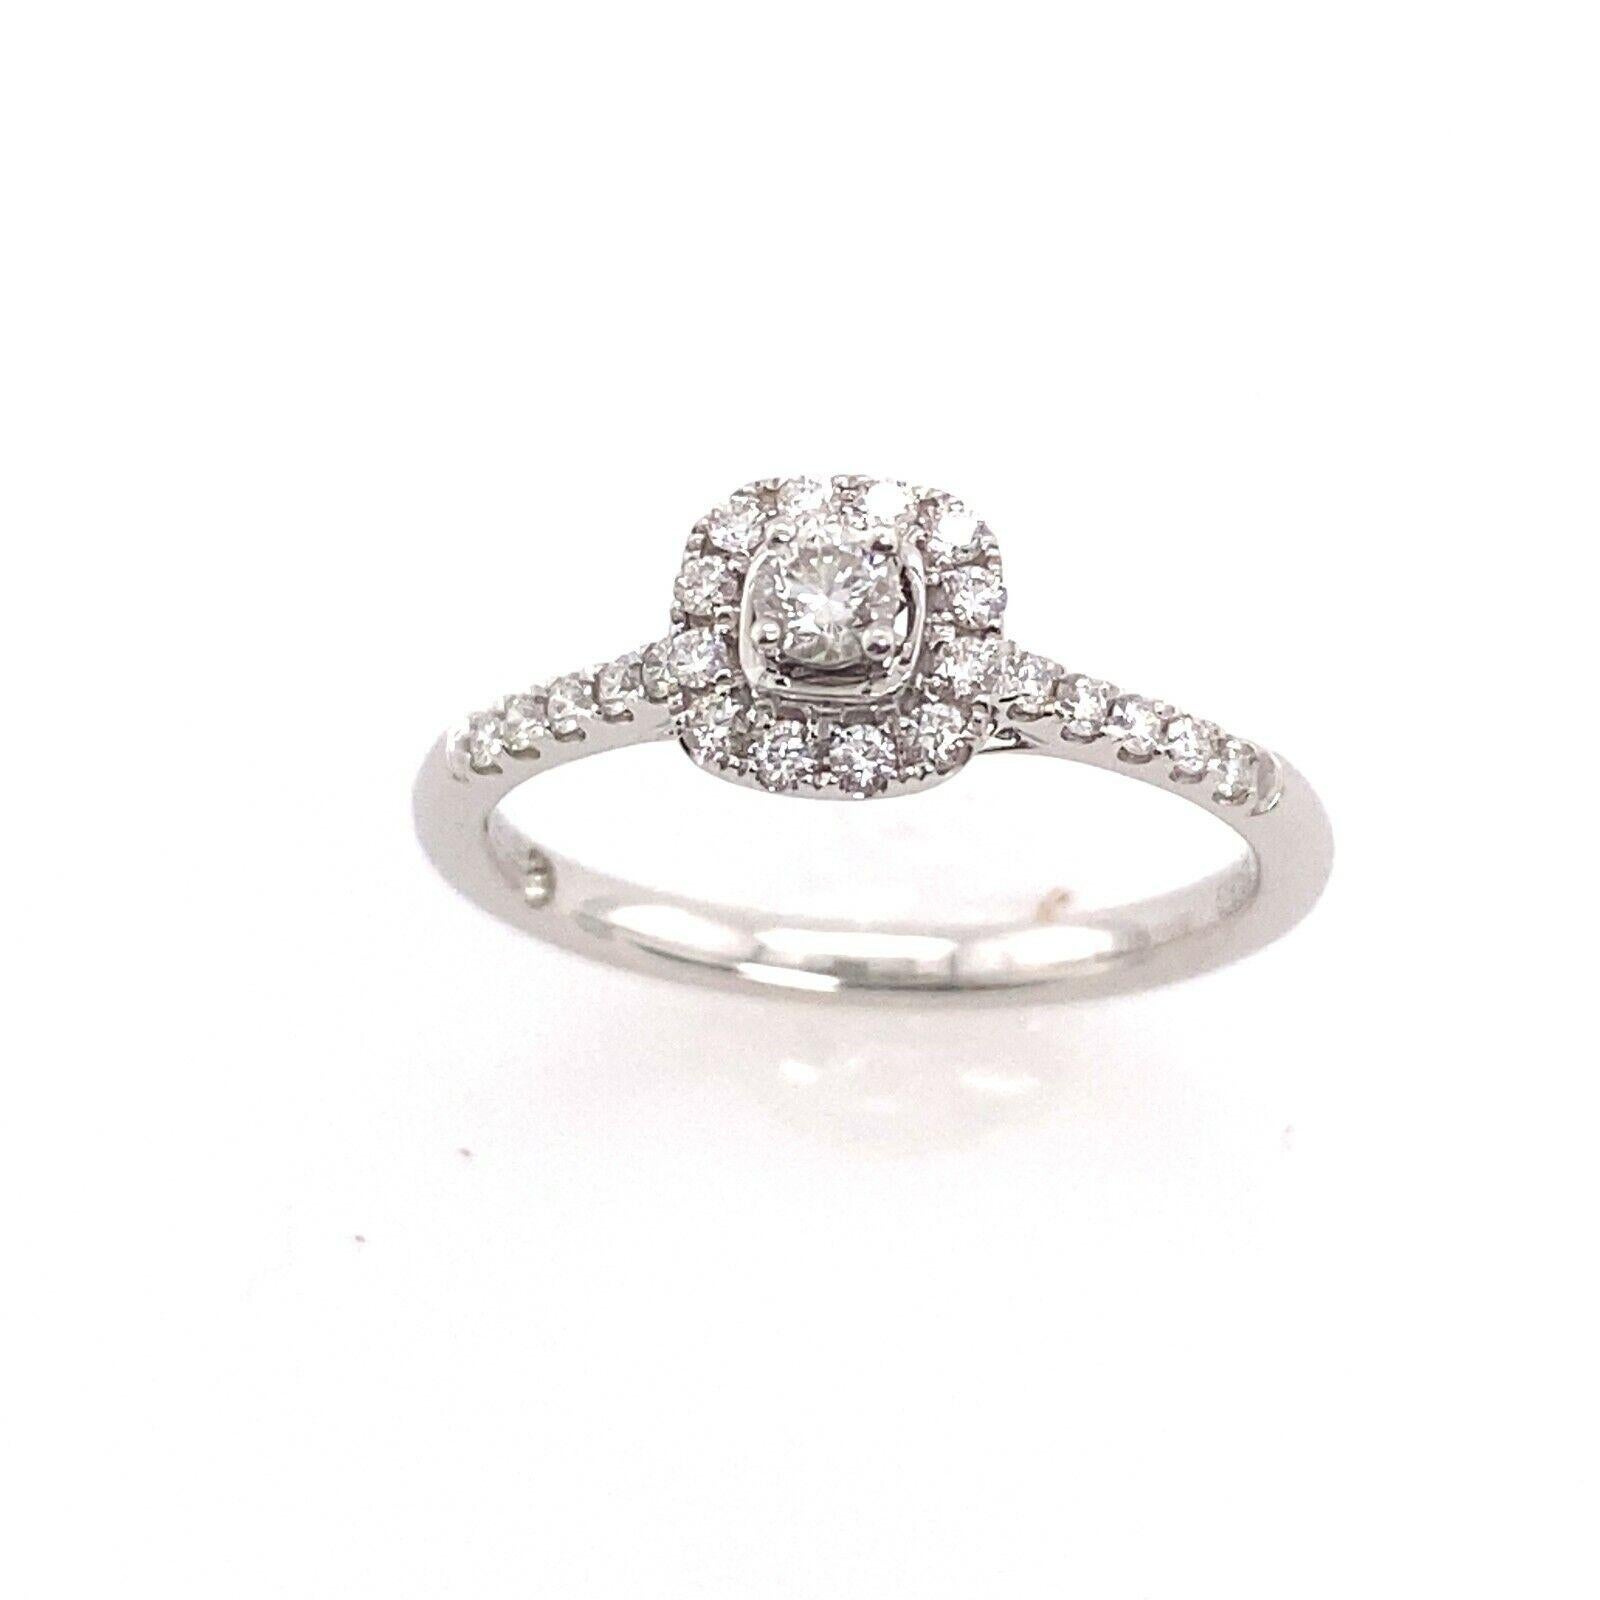 18ct White Gold Halo Cushion Shape Cluster Set With 0.35ct Of Diamonds

This stunning halo ring is the perfect symbol of your commitment to love. The ring is set in an 18ct white gold band, surrounded by stunning round diamonds.This ring is elegant